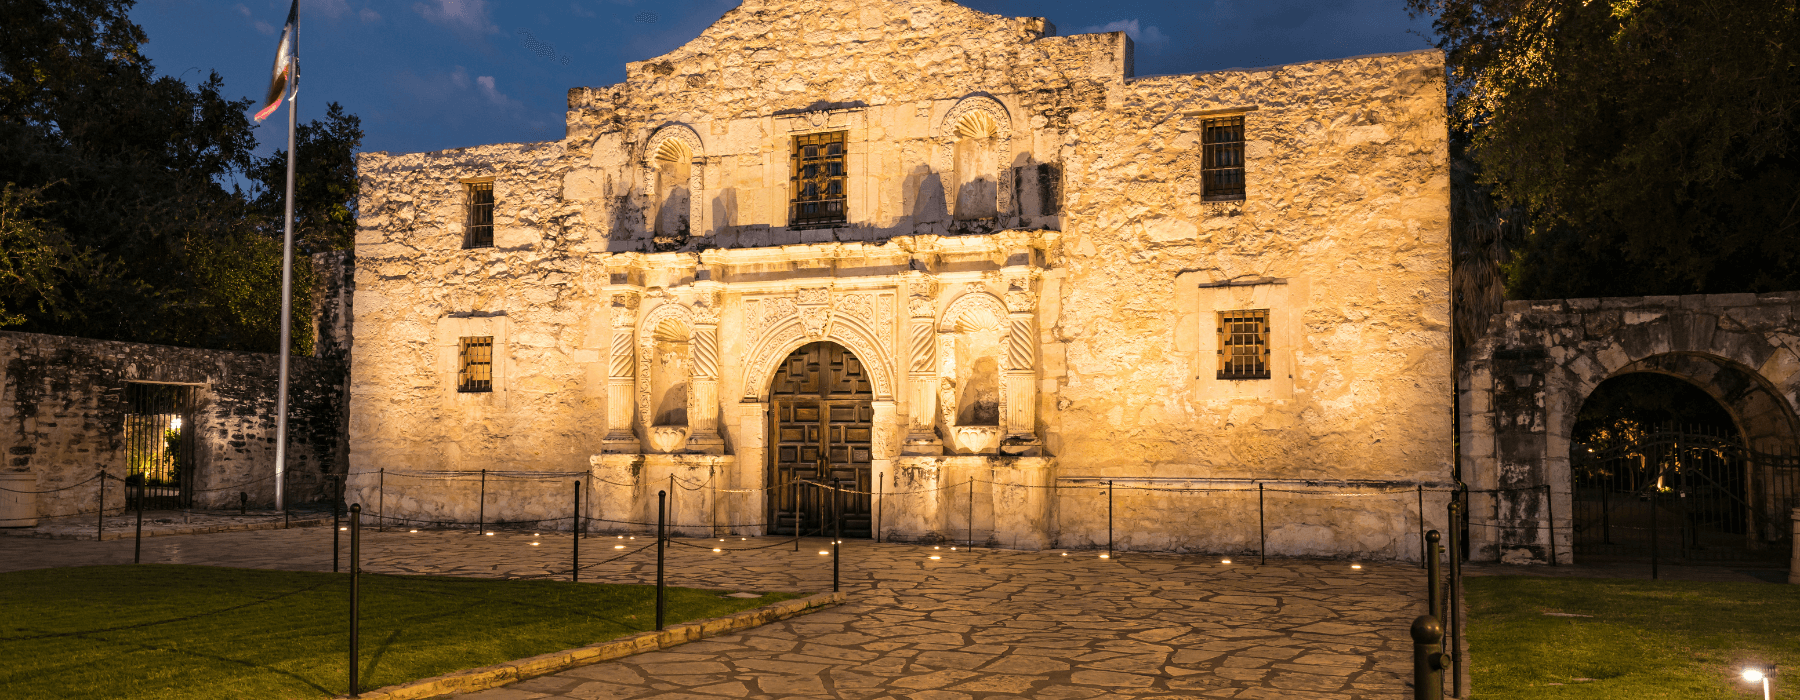 The historic Alamo at night, illuminated by warm lights, with the Texas flag flying proudly above.